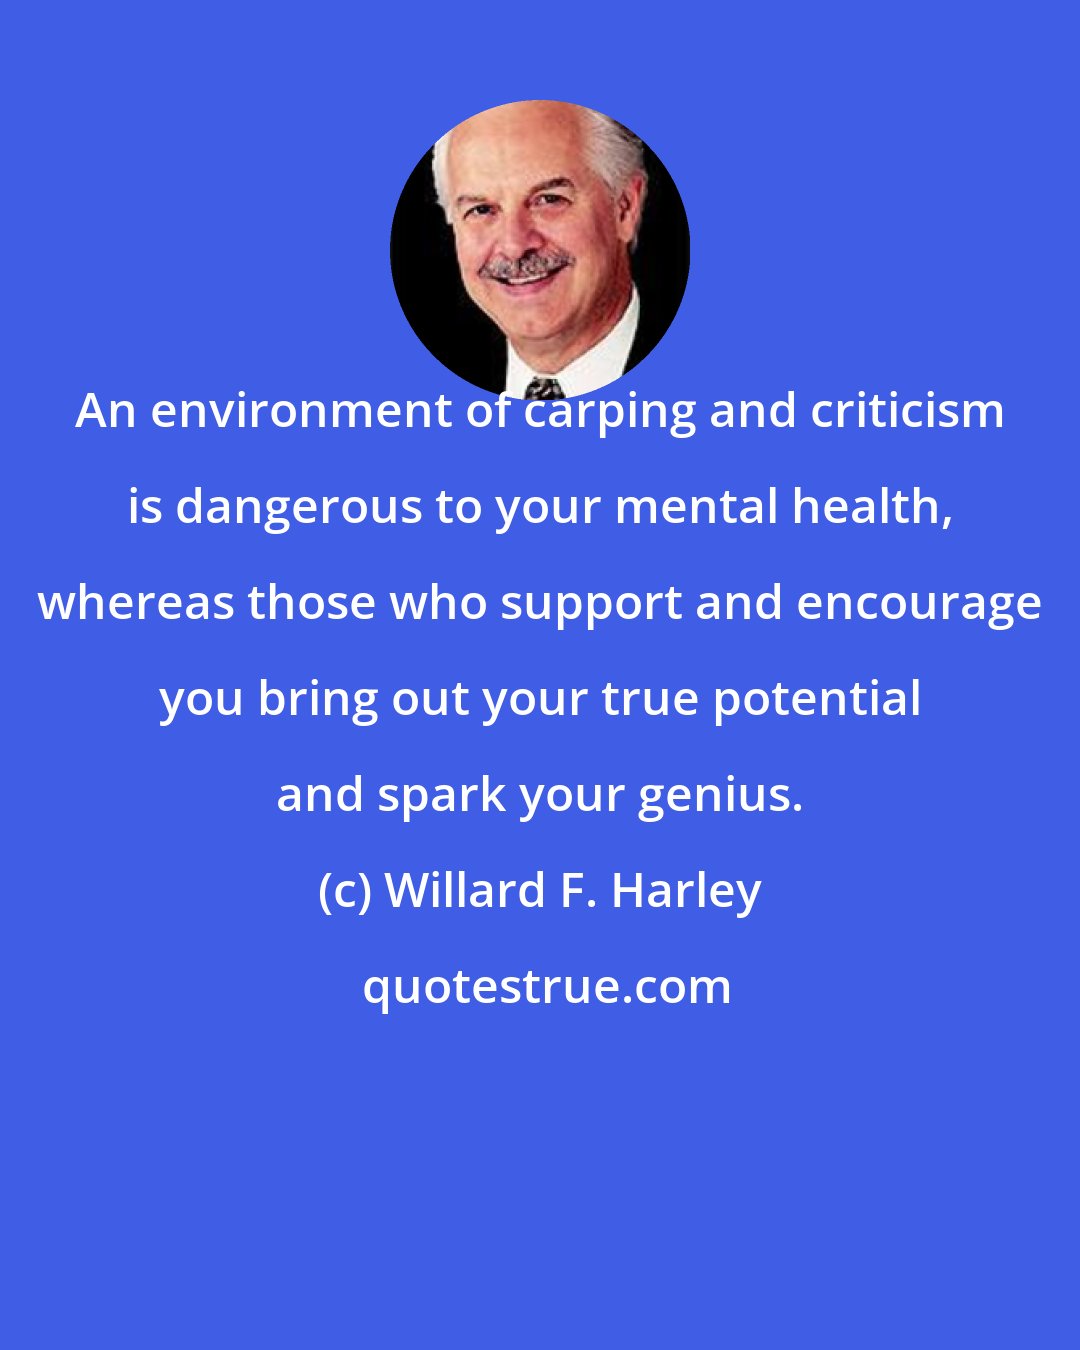 Willard F. Harley: An environment of carping and criticism is dangerous to your mental health, whereas those who support and encourage you bring out your true potential and spark your genius.